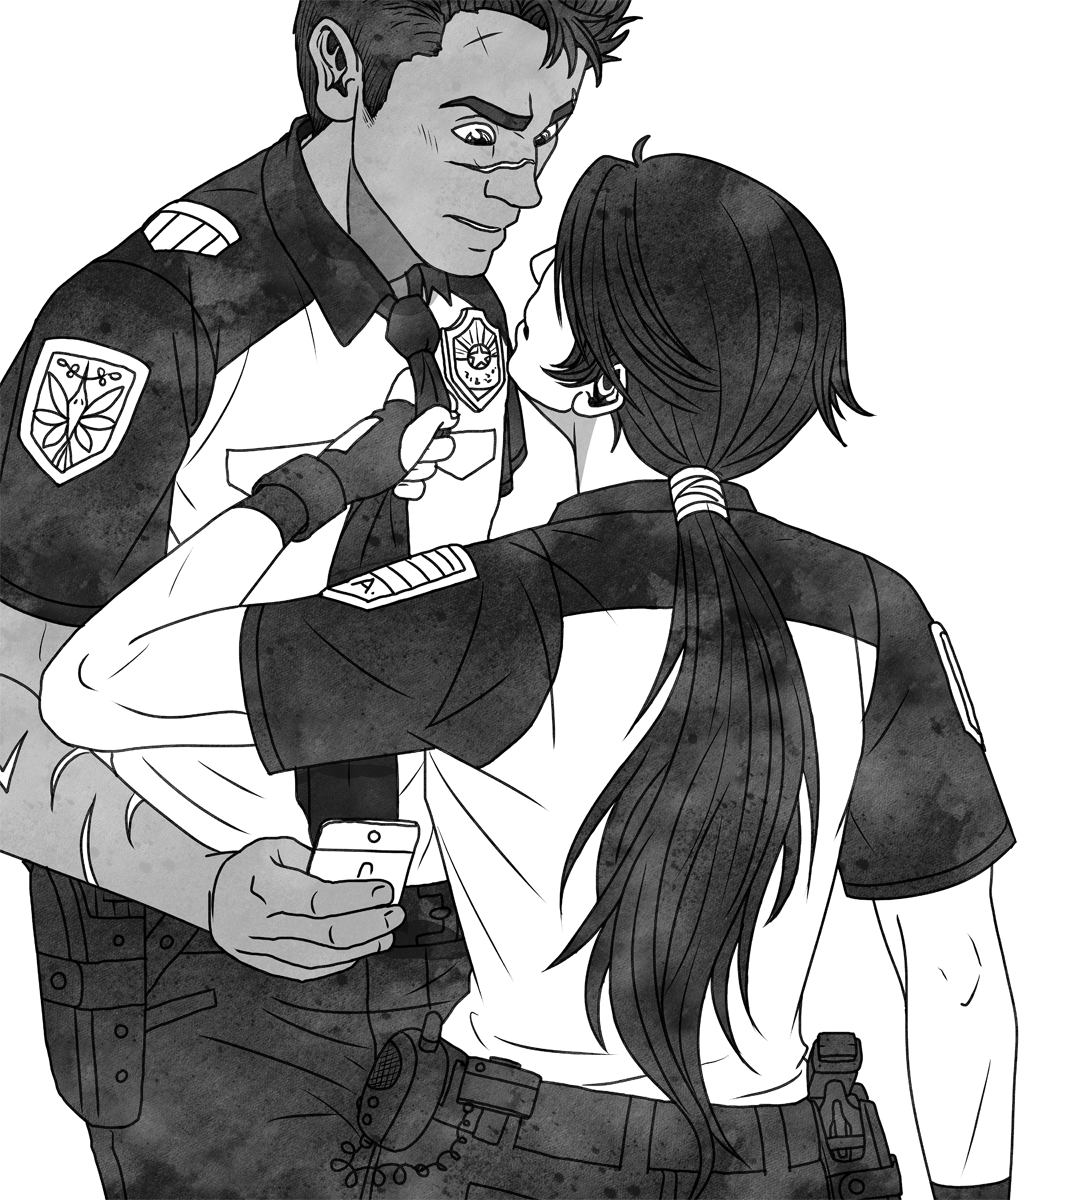 Two officers in uniform. The man with scars on his face and arm is holding a phone while the shorter woman with long black hair grabs him by the phone, forcing his attention to her.